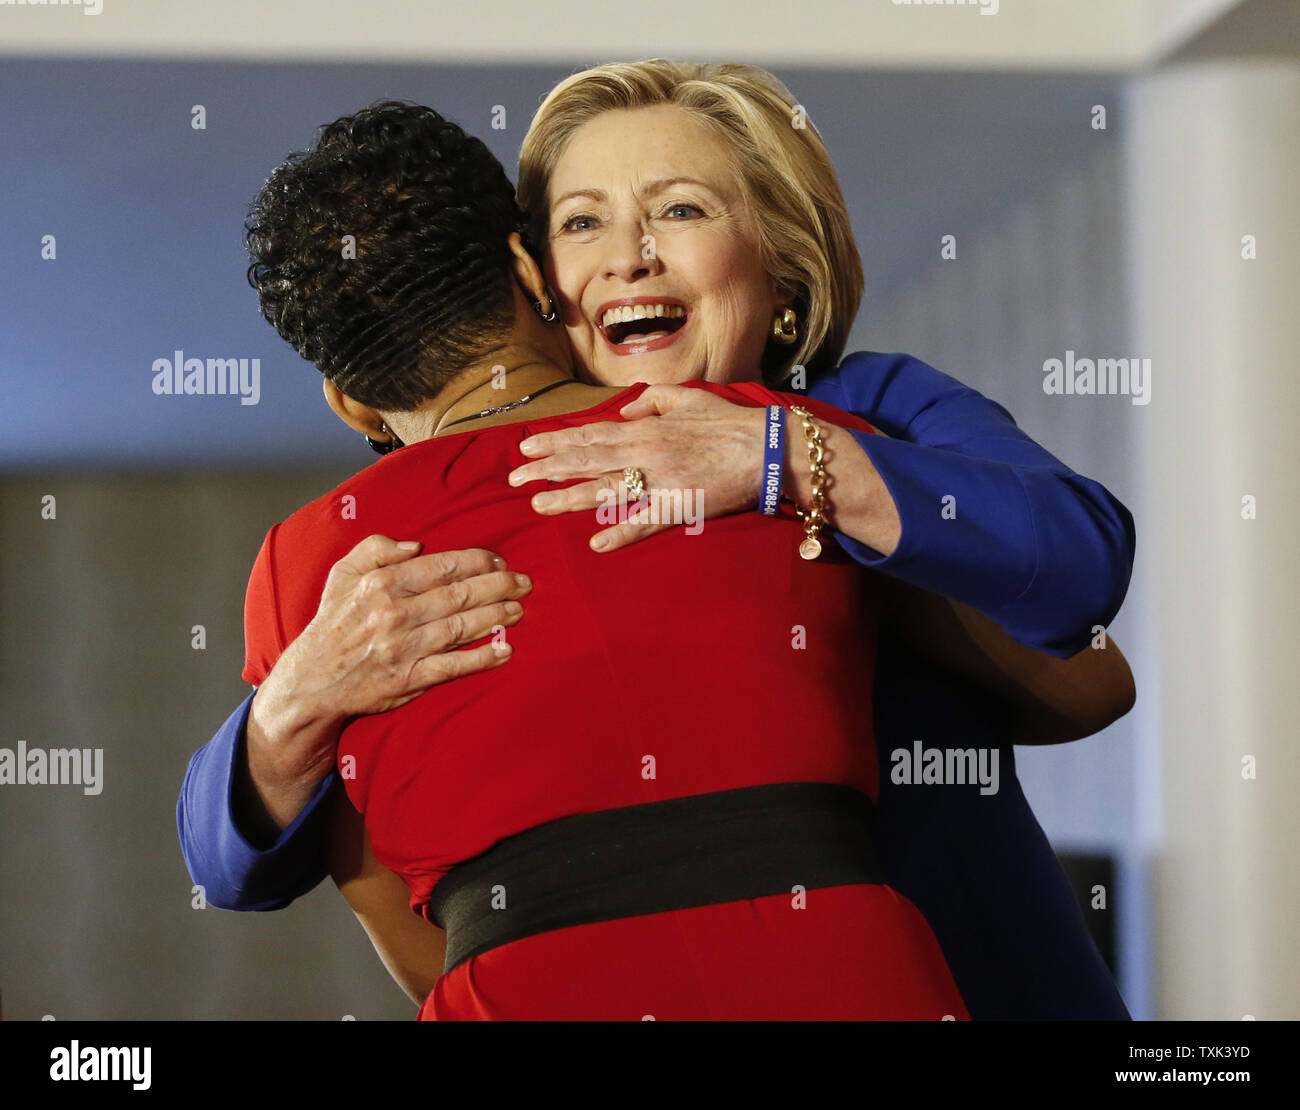 Democratic Presidential hopeful Hillary Clinton, right, hugs Geneva Reed-Veal, left, the mother of Sandra Bland, who was found dead in a Texas jail cell, before speaking to supporters at a 'Get Out the Vote' organizing event at the Parkway Ballroom in Chicago on February 17, 2016. Clinton's appearance in Chicago's Bronzeville neighborhood, a historic African American community, is part of a major effort of her campaign to reach out to black voters. Photo by Kamil Krzaczynski/UPI Stock Photo